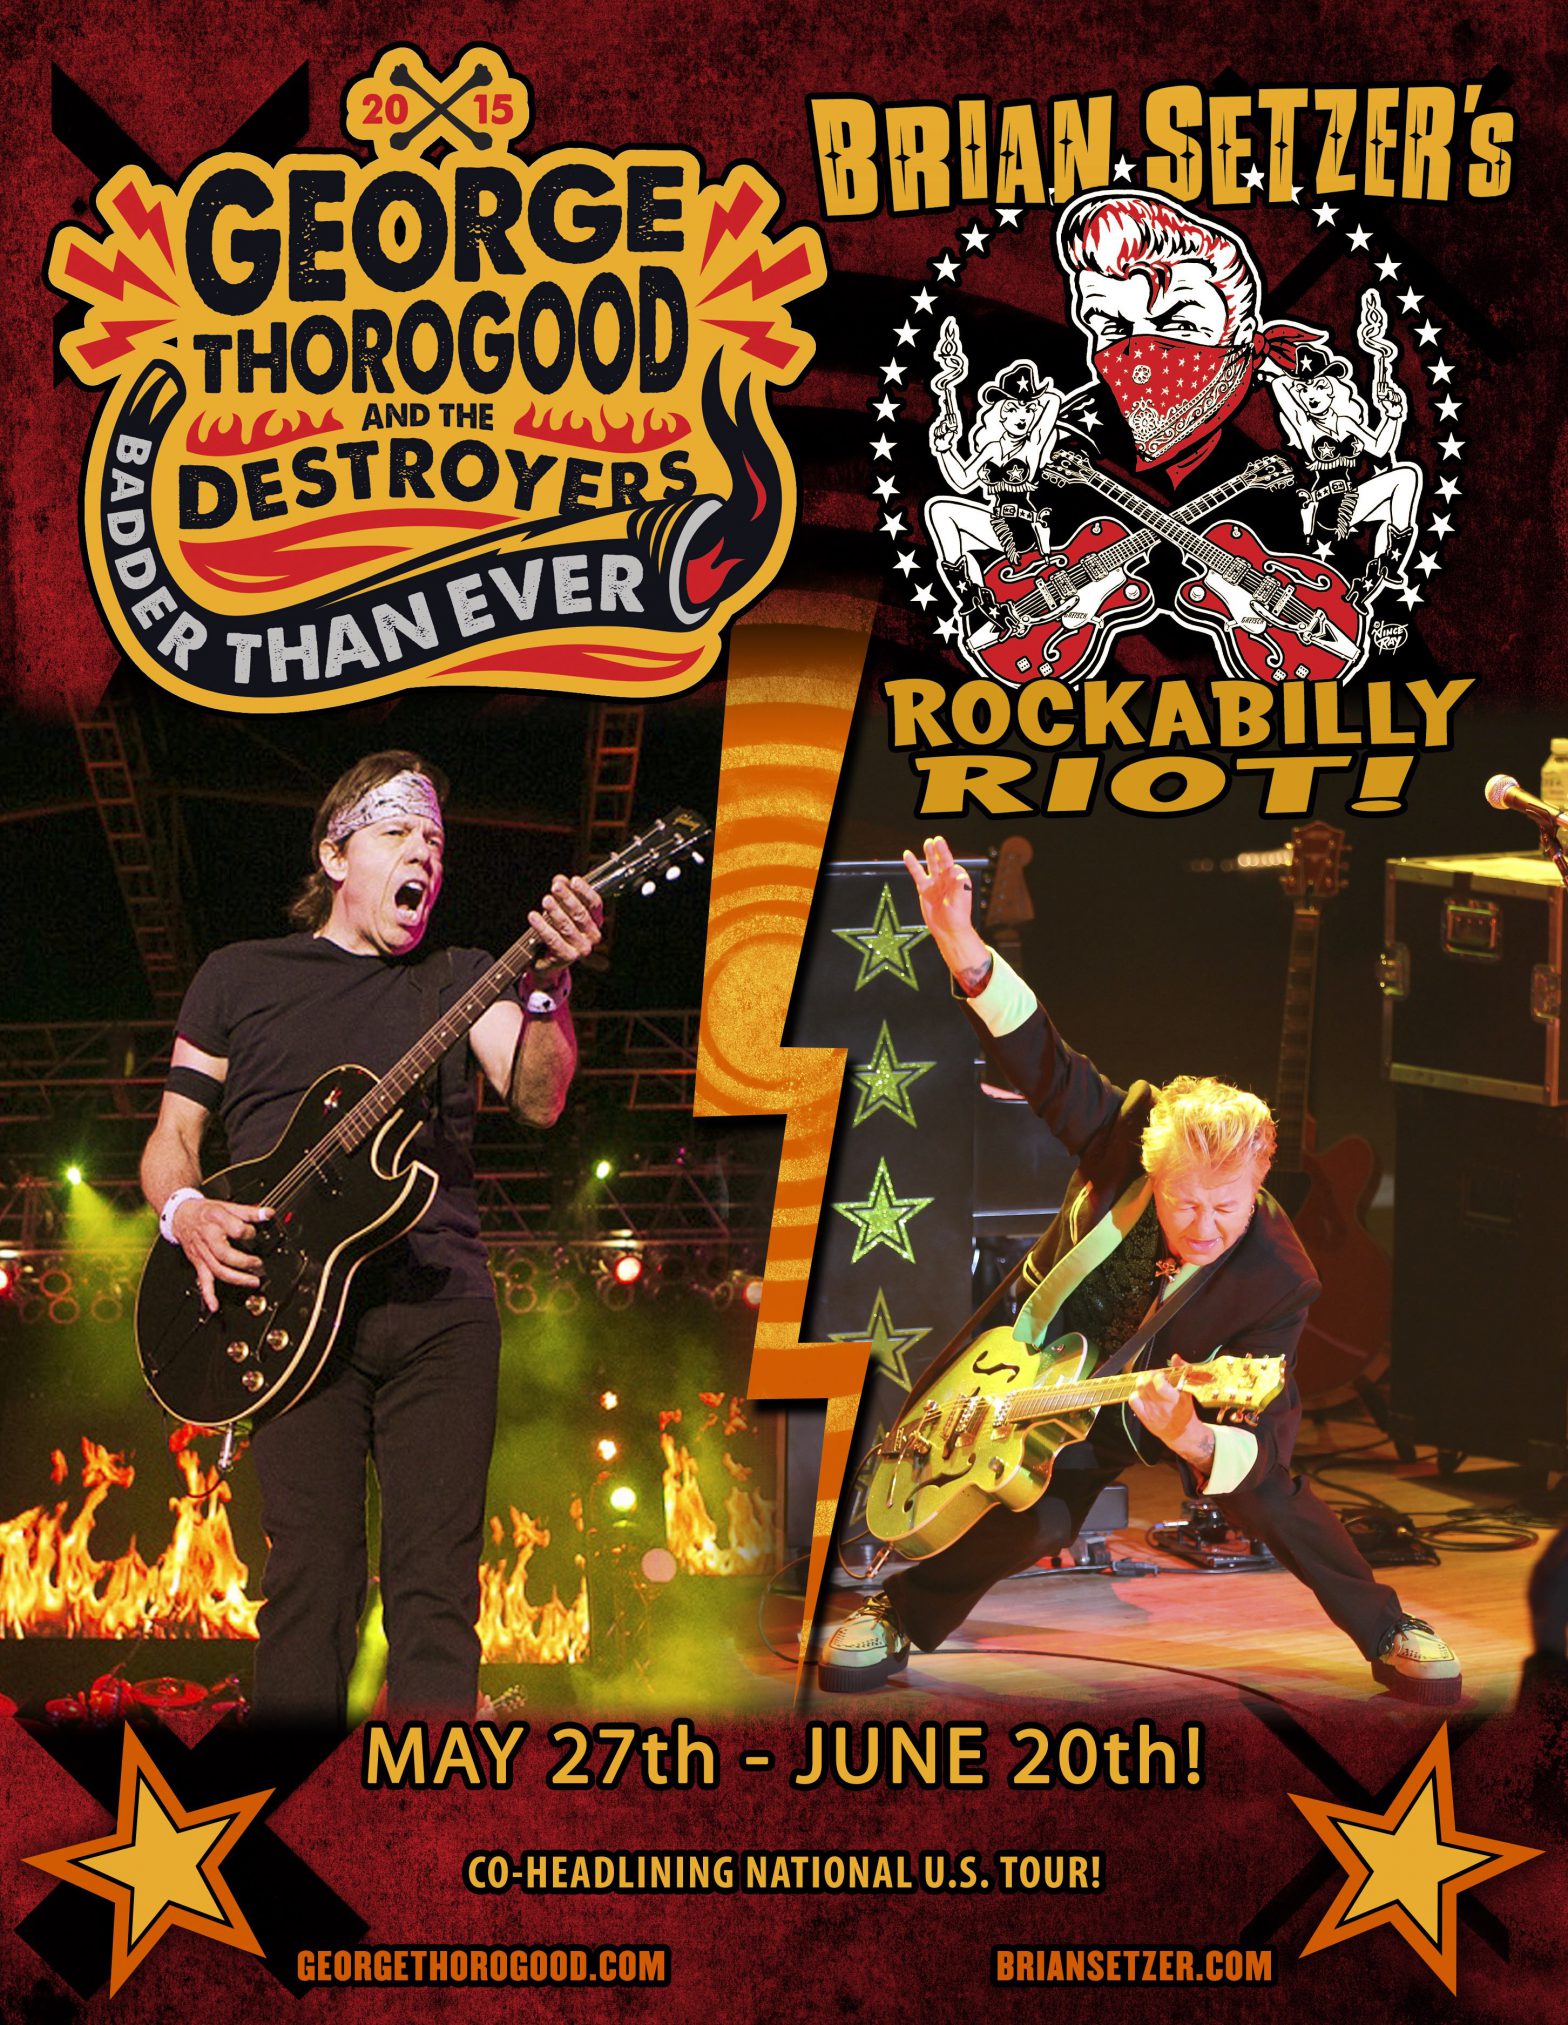 Thorogood and The Destroyers and Brian Setzer coheadline on